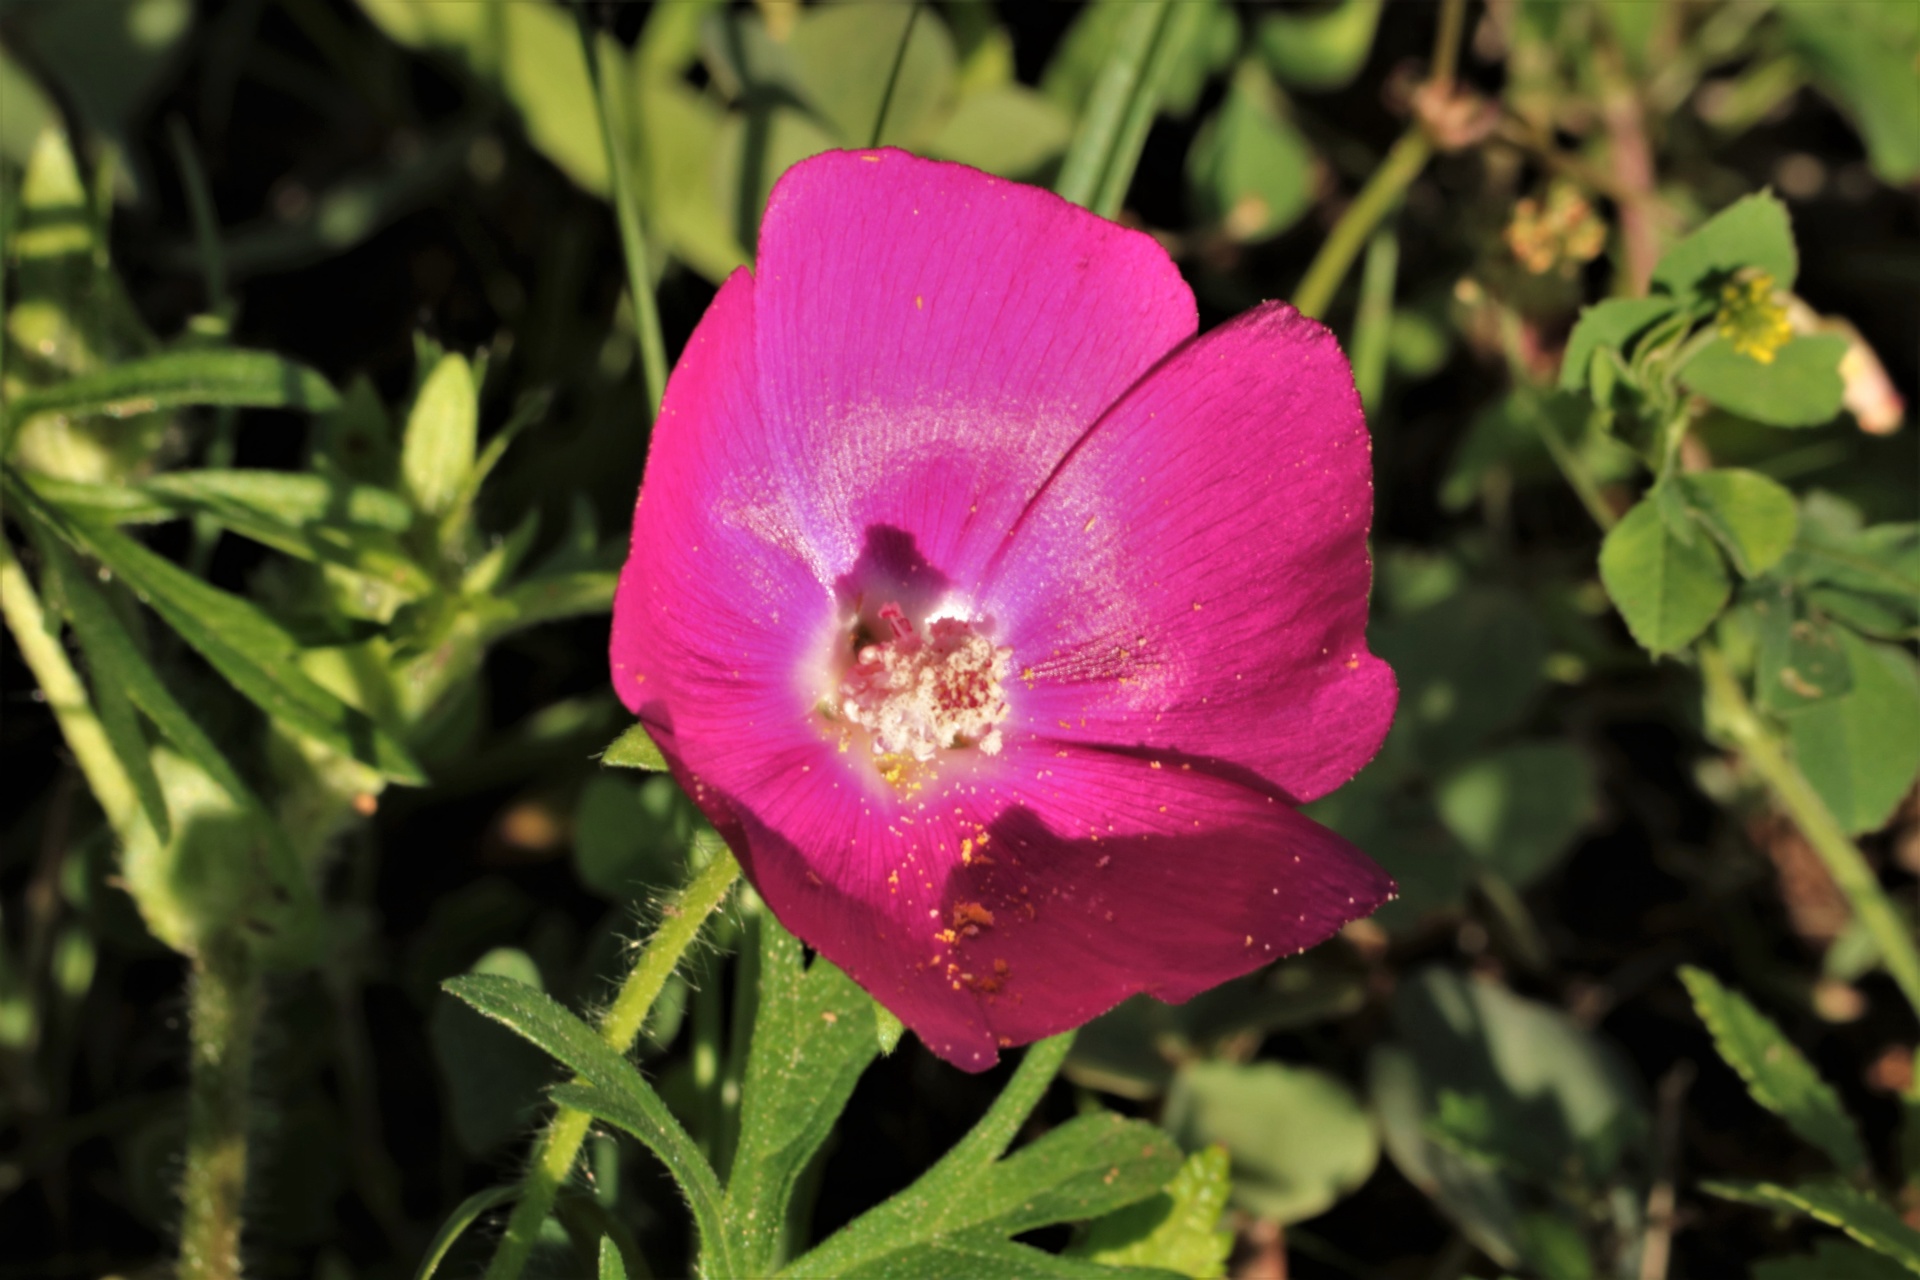 Close-up of a dark purple poppy mallow wildflower with green leaves in the background.